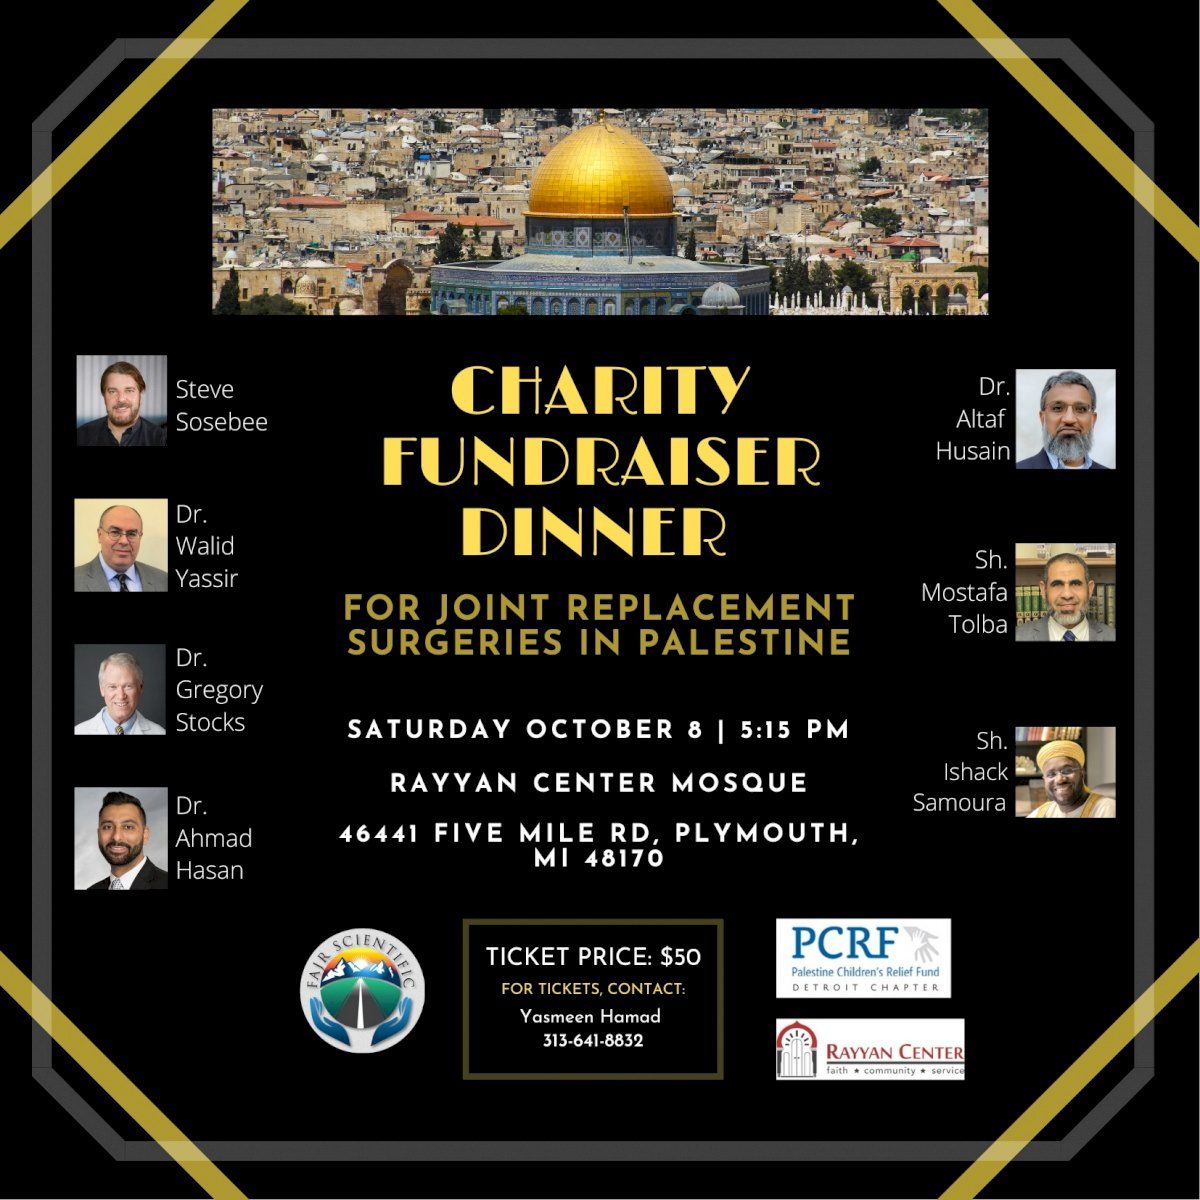 Flyer for Charity Fundraiser Dinner for Join Replacement Surgeries in Palestine, to be held at the Rayyan Center Mosque, 46441 Five Mile Road, in Plymouth, at 5:15 p.m., Oct. 8.